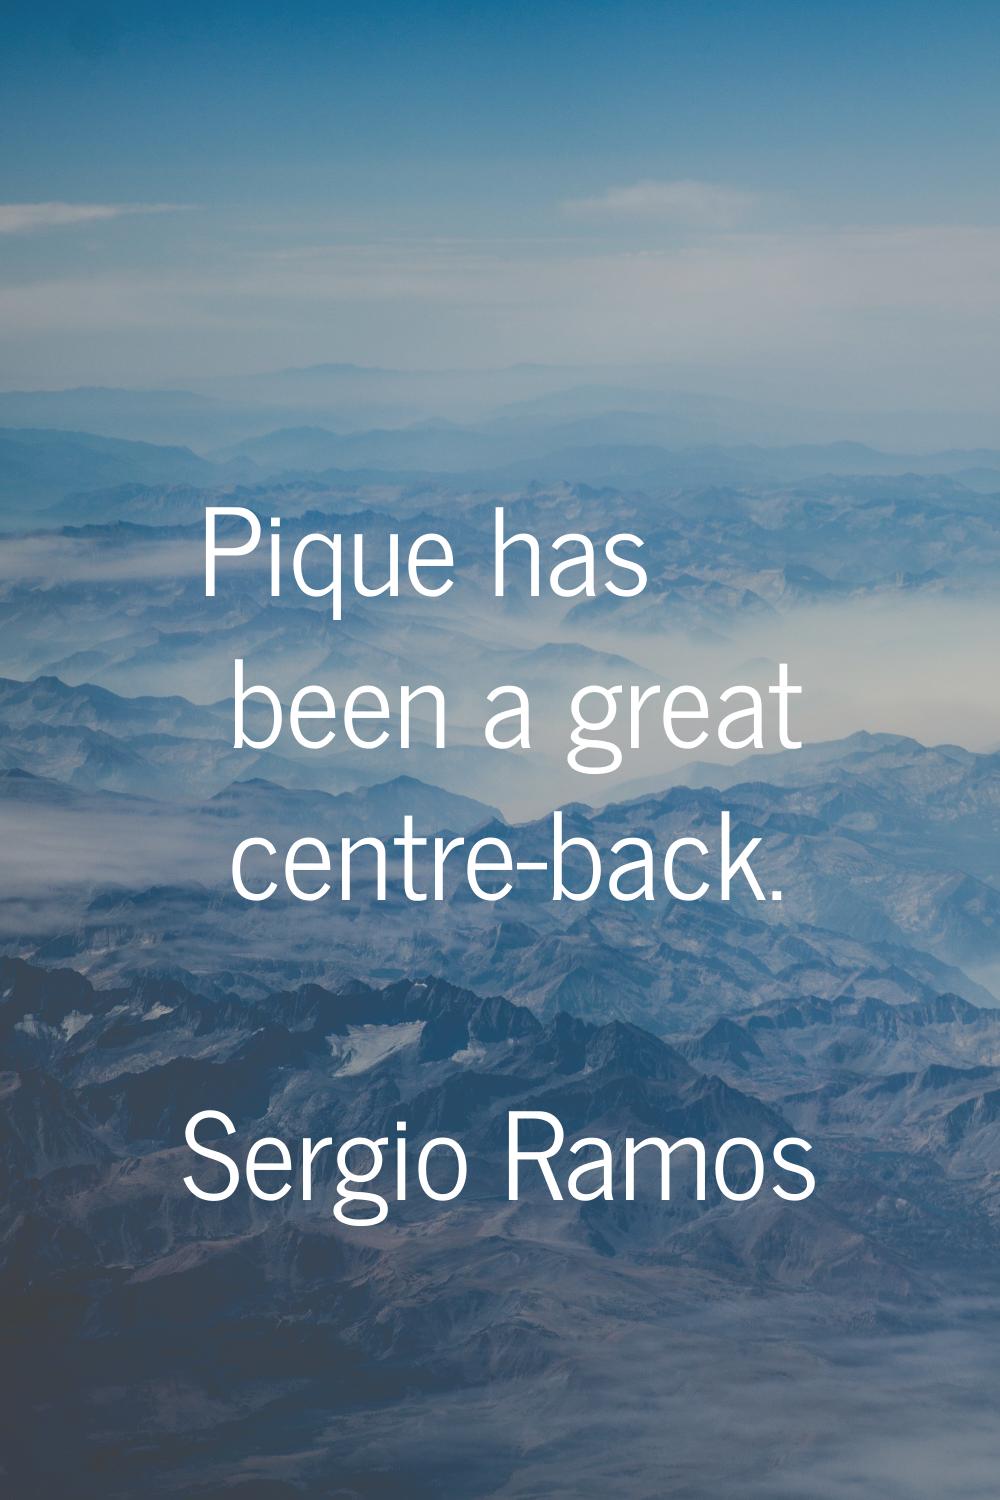 Pique has been a great centre-back.